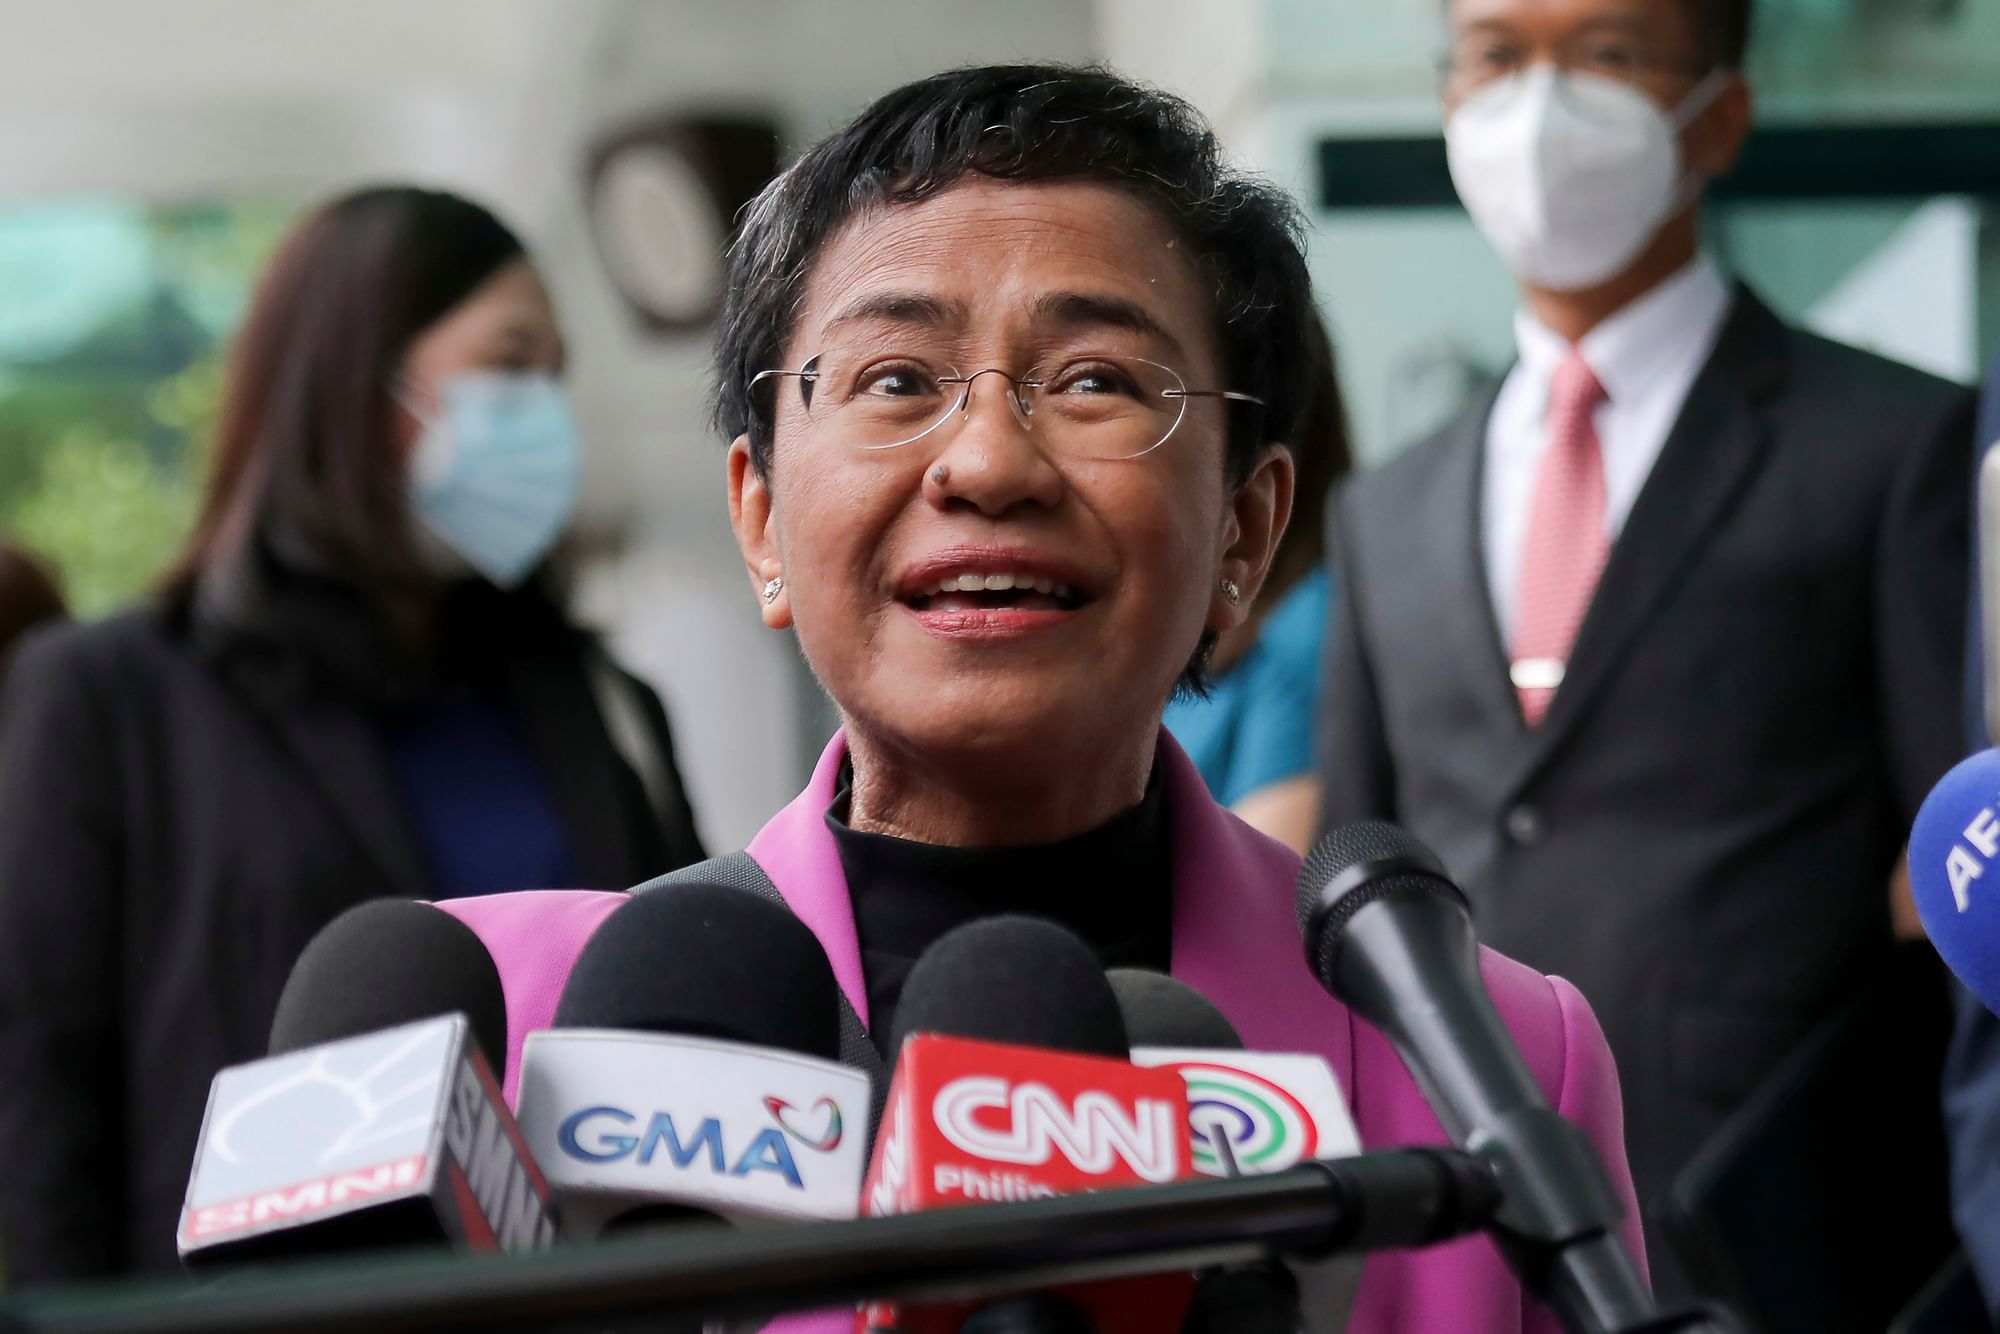 <div class="paragraphs"><p>Filipino journalist Maria Ressa, one of the winners of the 2021 Nobel Peace Prize and Rappler CEO, speaks to the media after a court decision at the Court of Tax Appeals in Quezon City, Philippines on Wednesday, 18 January. The tax court on Wednesday cleared Ressa and her online news company of tax evasion charges she said were part of a slew of legal cases used by former President Rodrigo Duterte to muzzle critical reporting.</p></div>